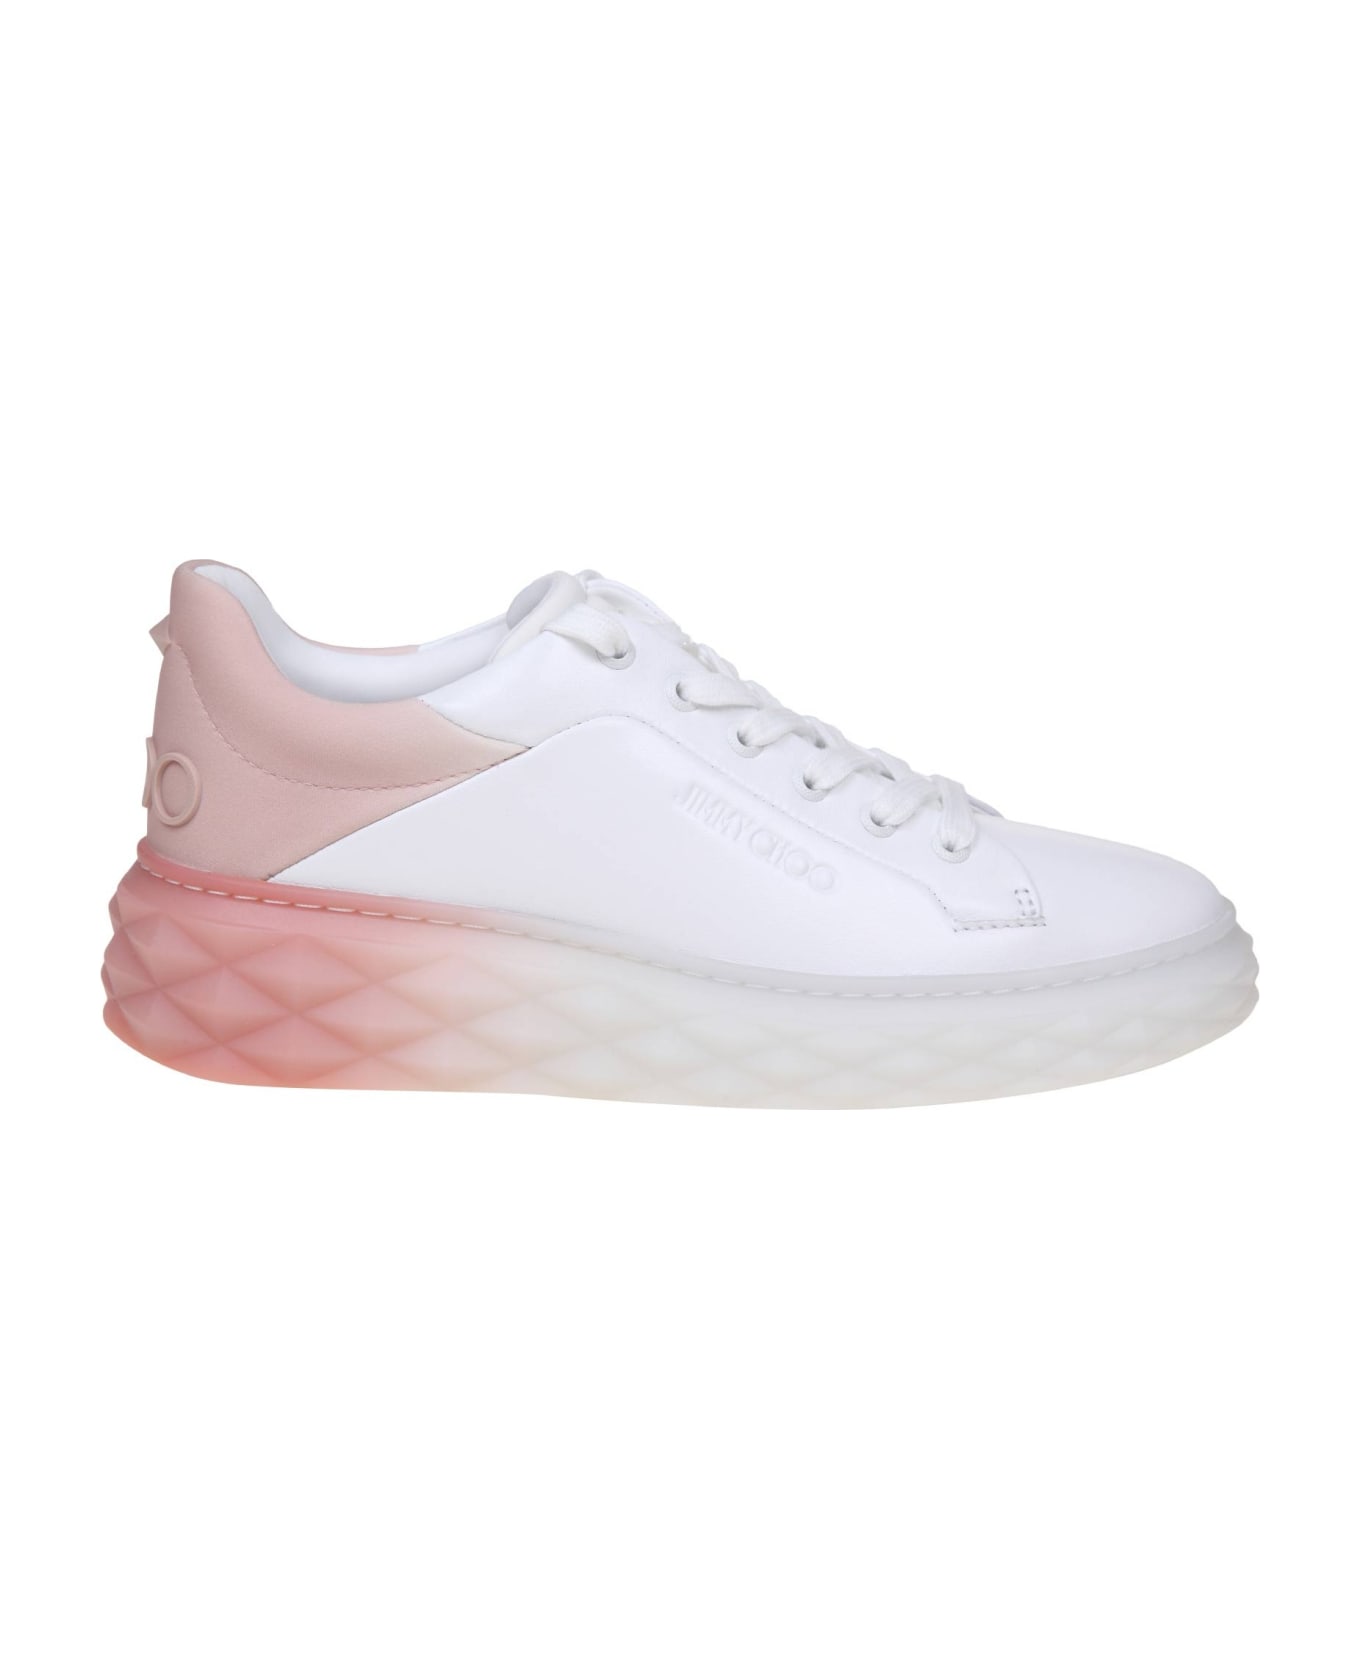 Jimmy Choo Diamond Maxi Sneakers In White And Pink Leather - White Black Mix ウェッジシューズ